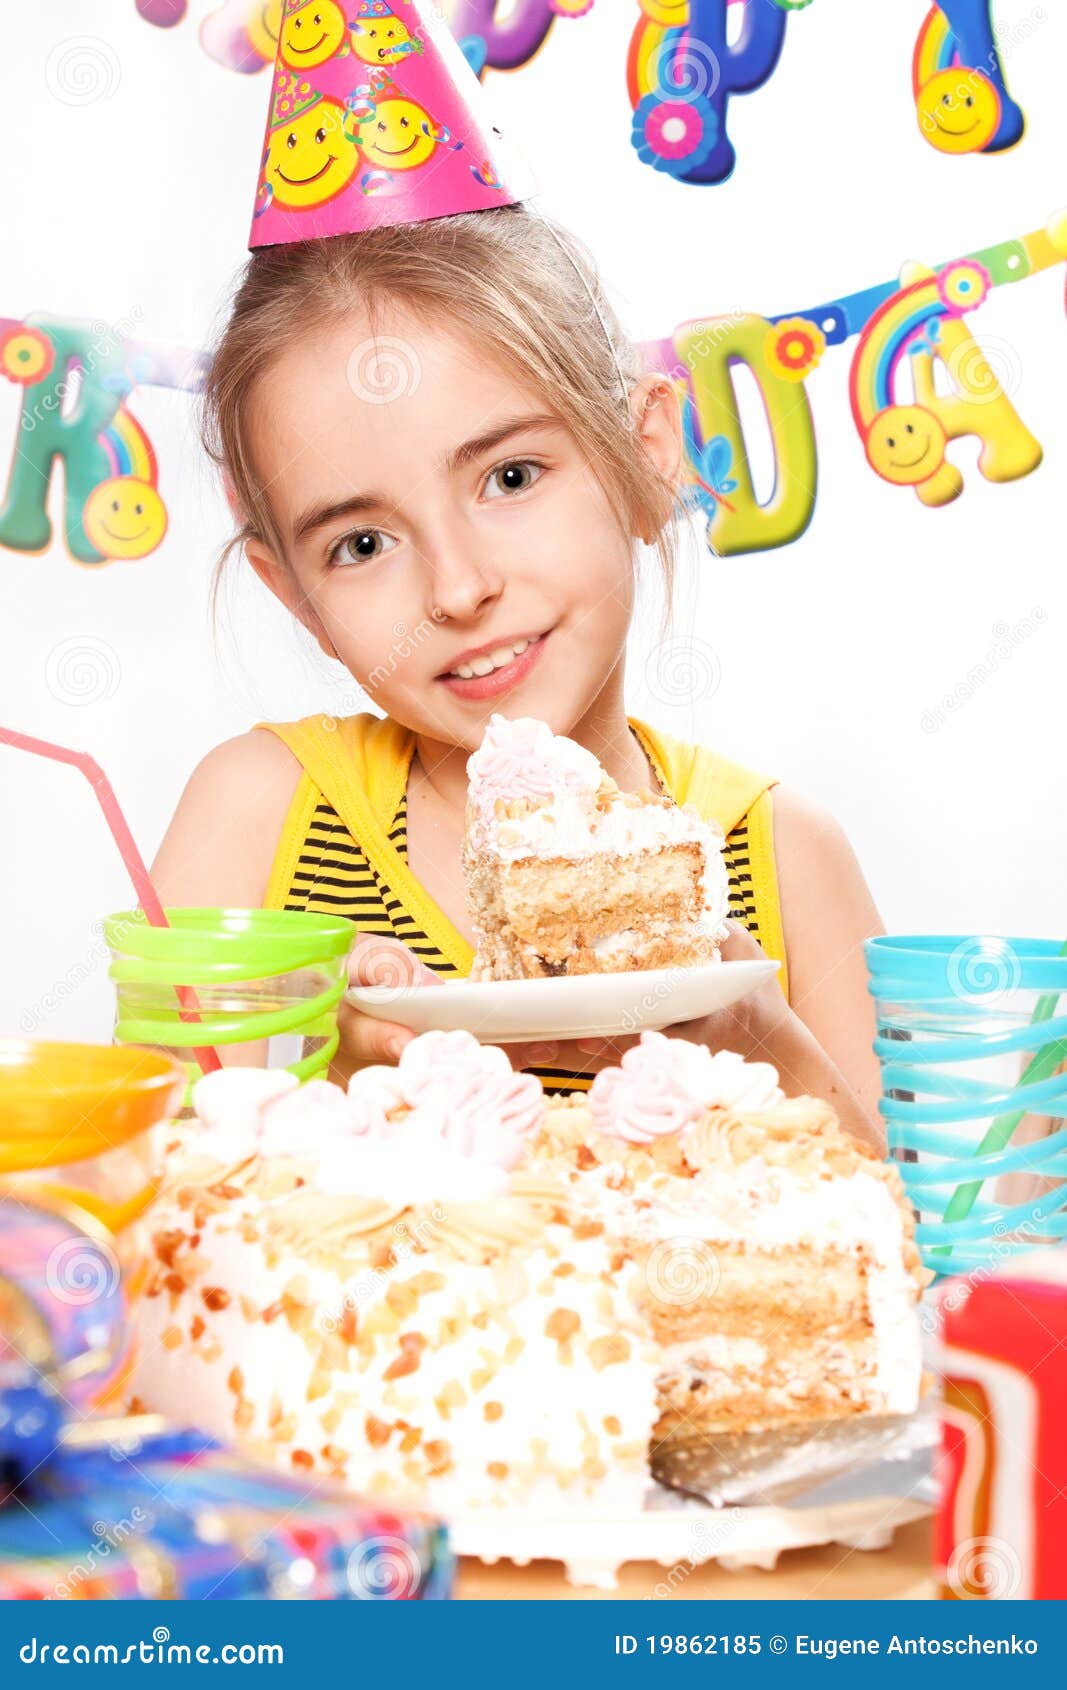 Funny birthday party stock image. Image of event, child - 19862185
 Funny Party Time Images